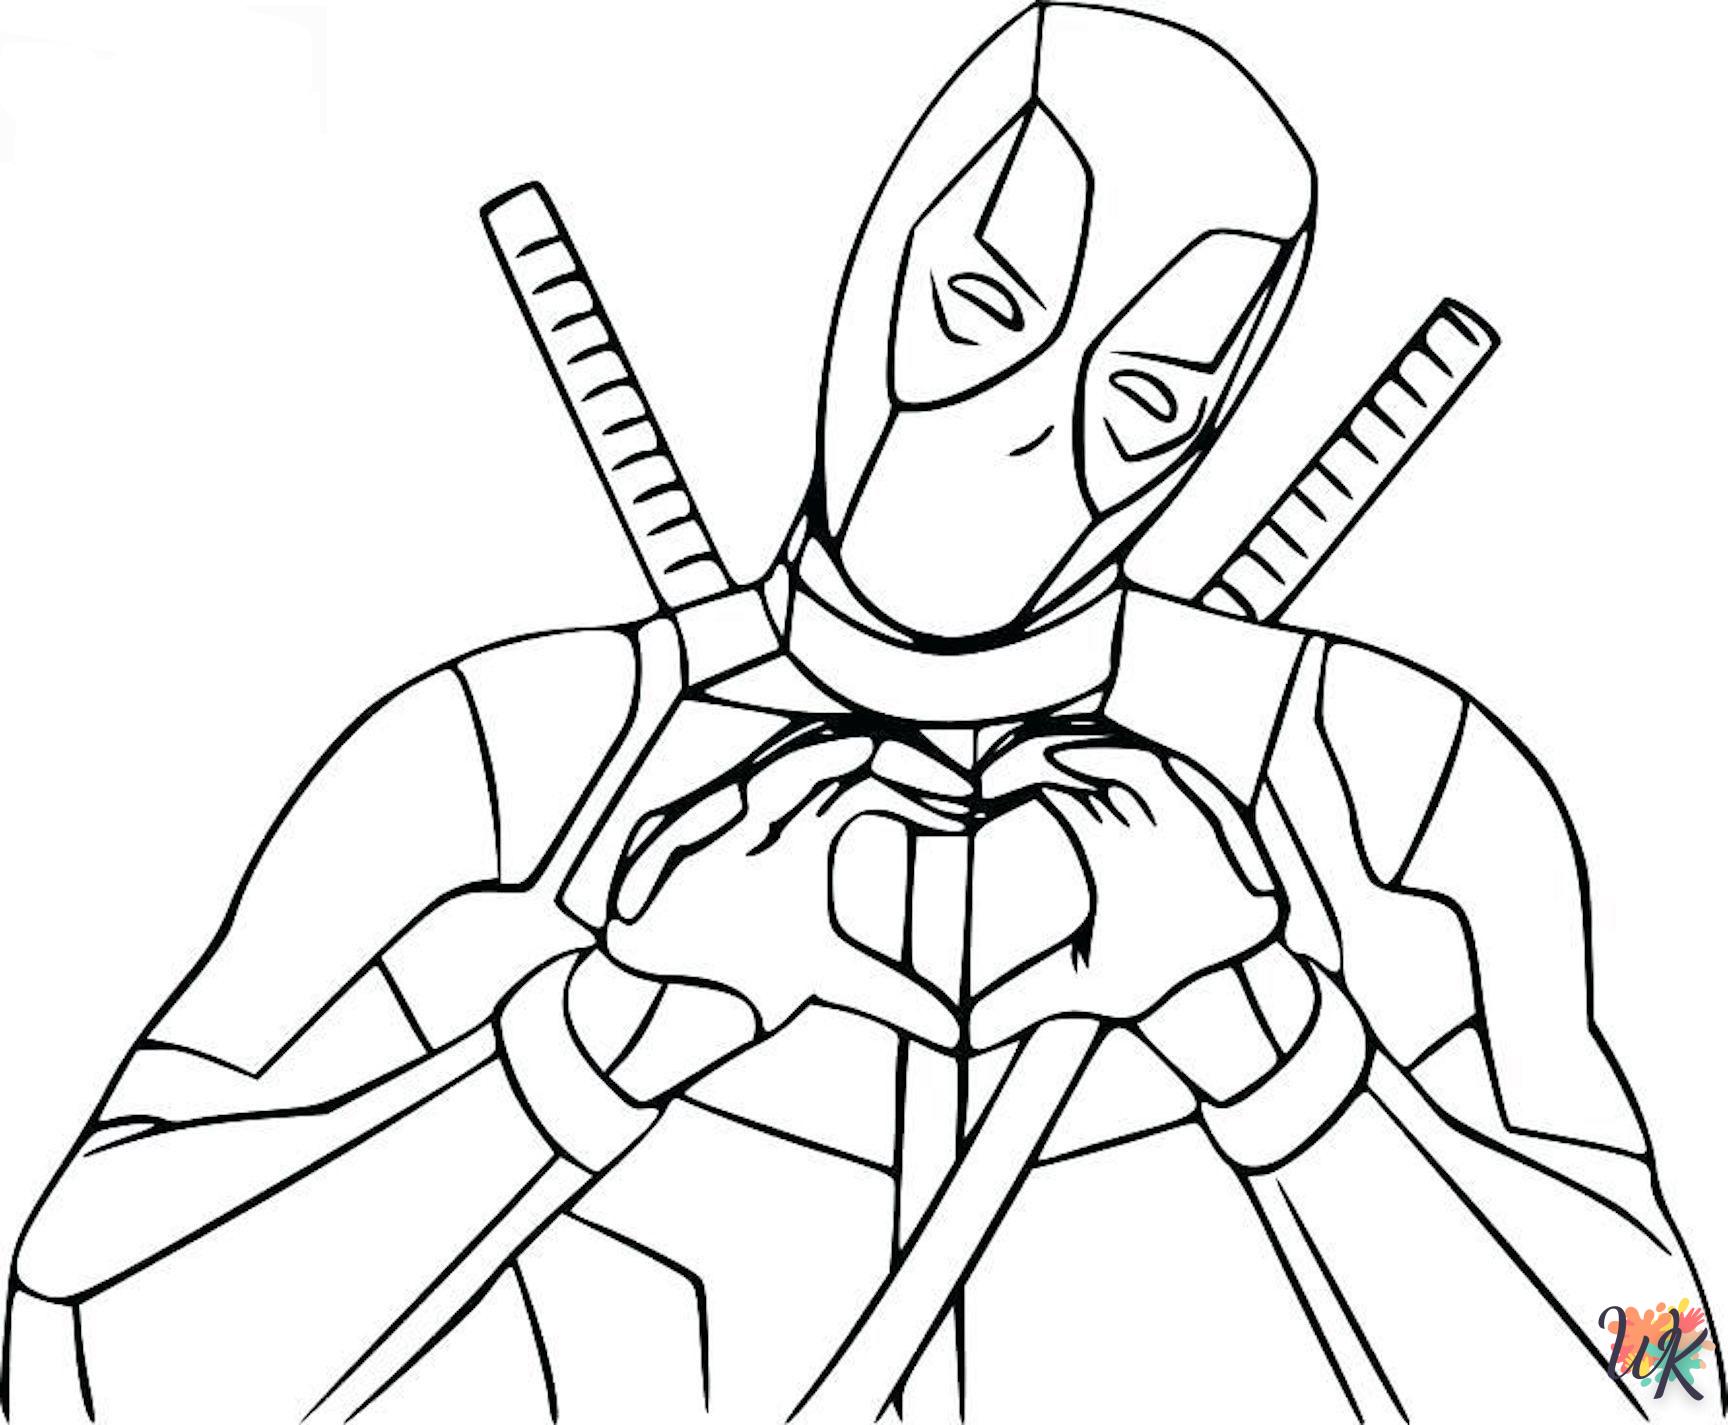 easy Superhero coloring pages